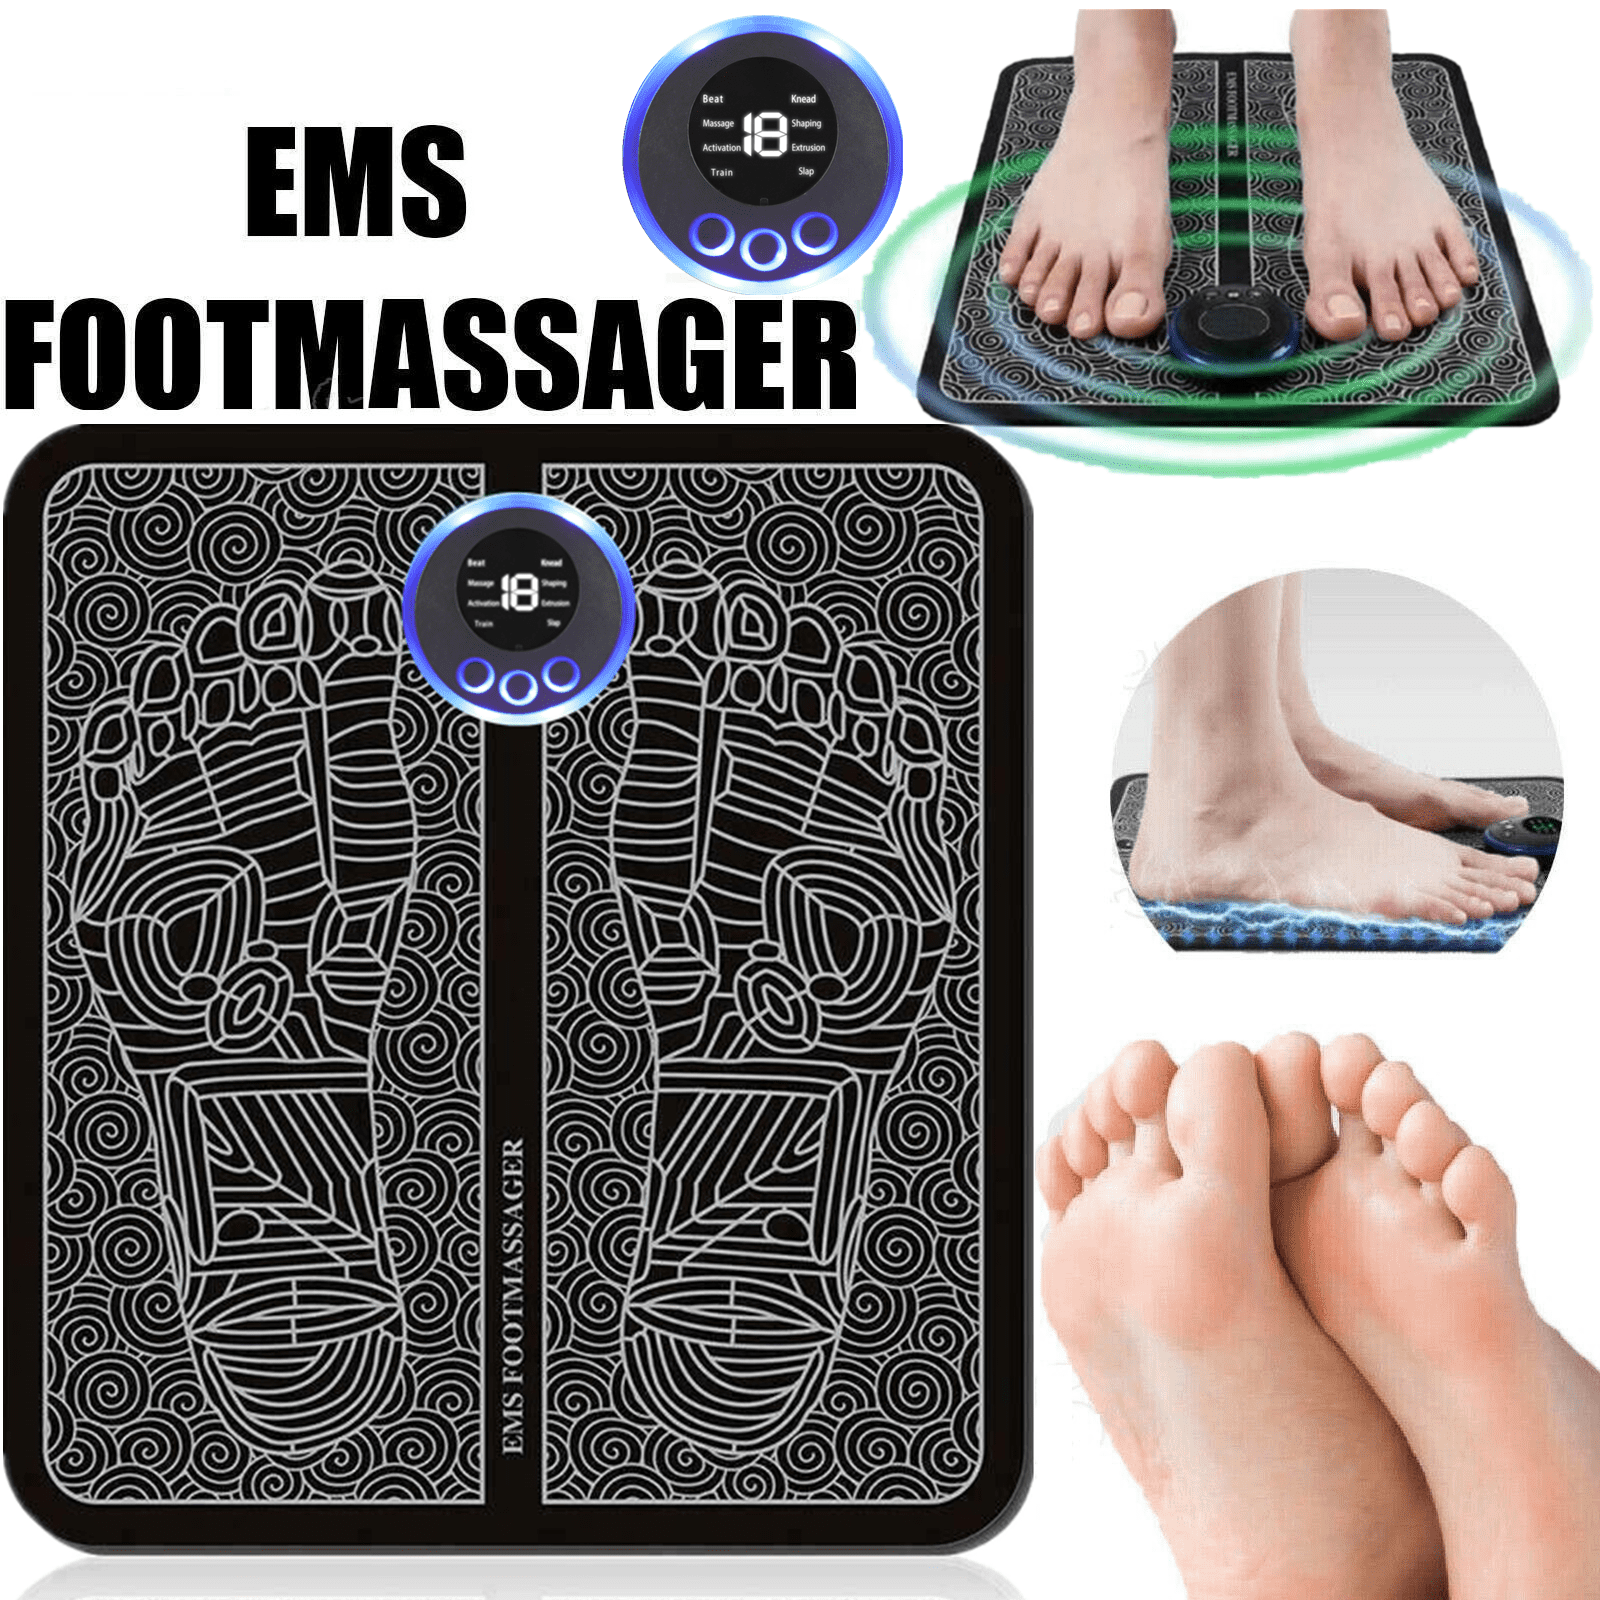 QUINEAR Foot Stimulator, FSA HSA Eligible, EMS Foot Massager and Electronic  Stimulator with TENS Uni…See more QUINEAR Foot Stimulator, FSA HSA